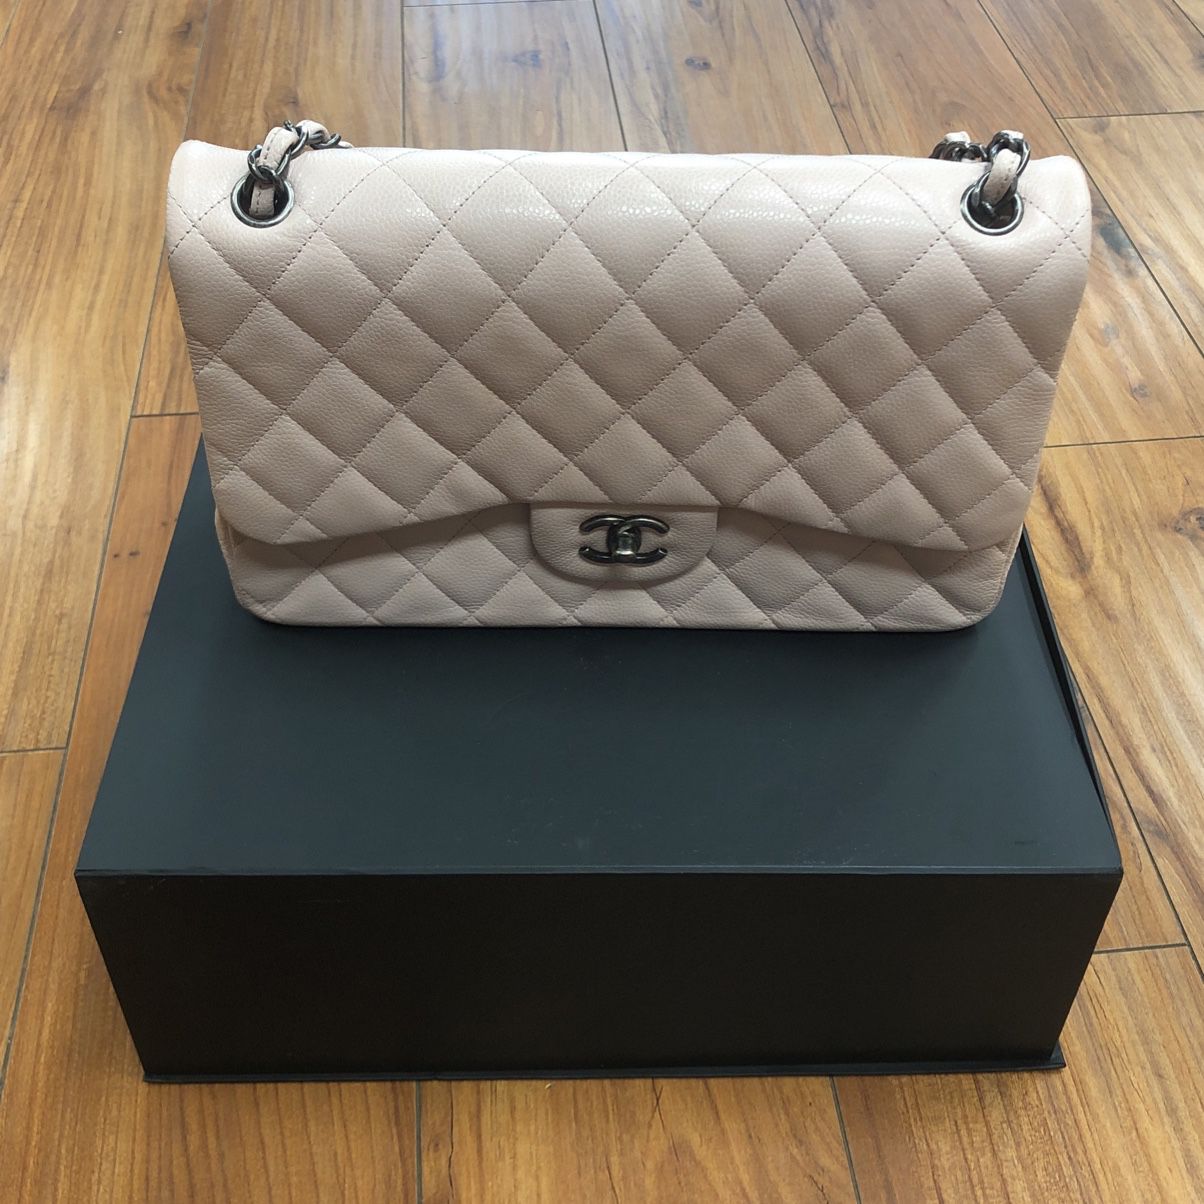 2023 CHANEL FLAPBAG In BLK 100% AUTHENTIC W/RECIEPT for Sale in Huntington  Beach, CA - OfferUp